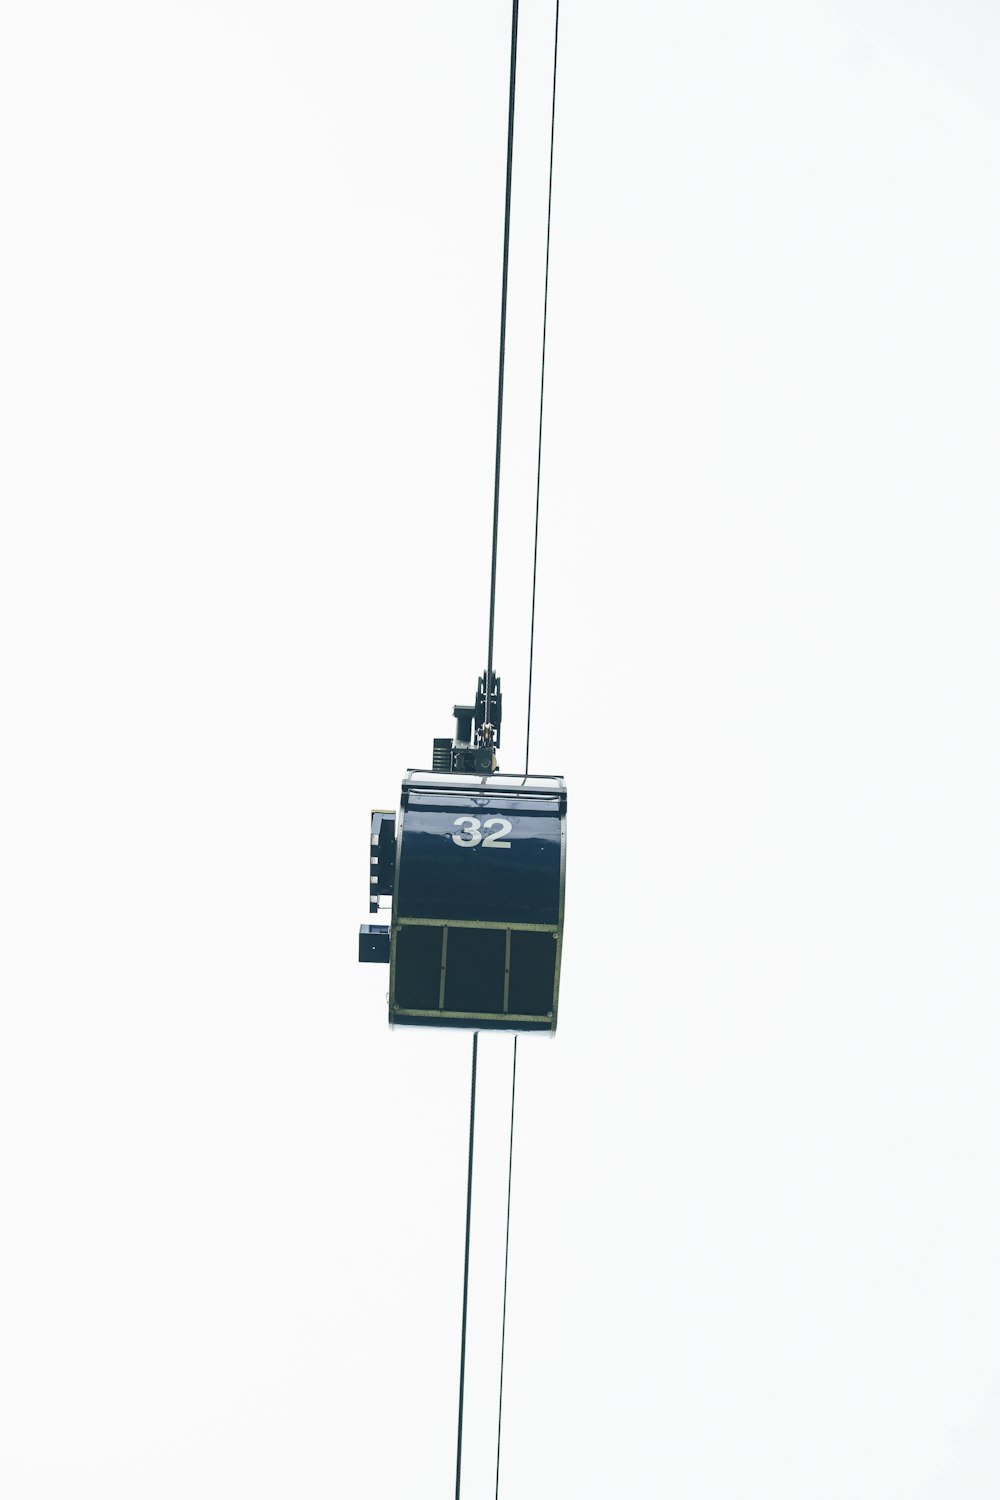 cable car on line during daytime